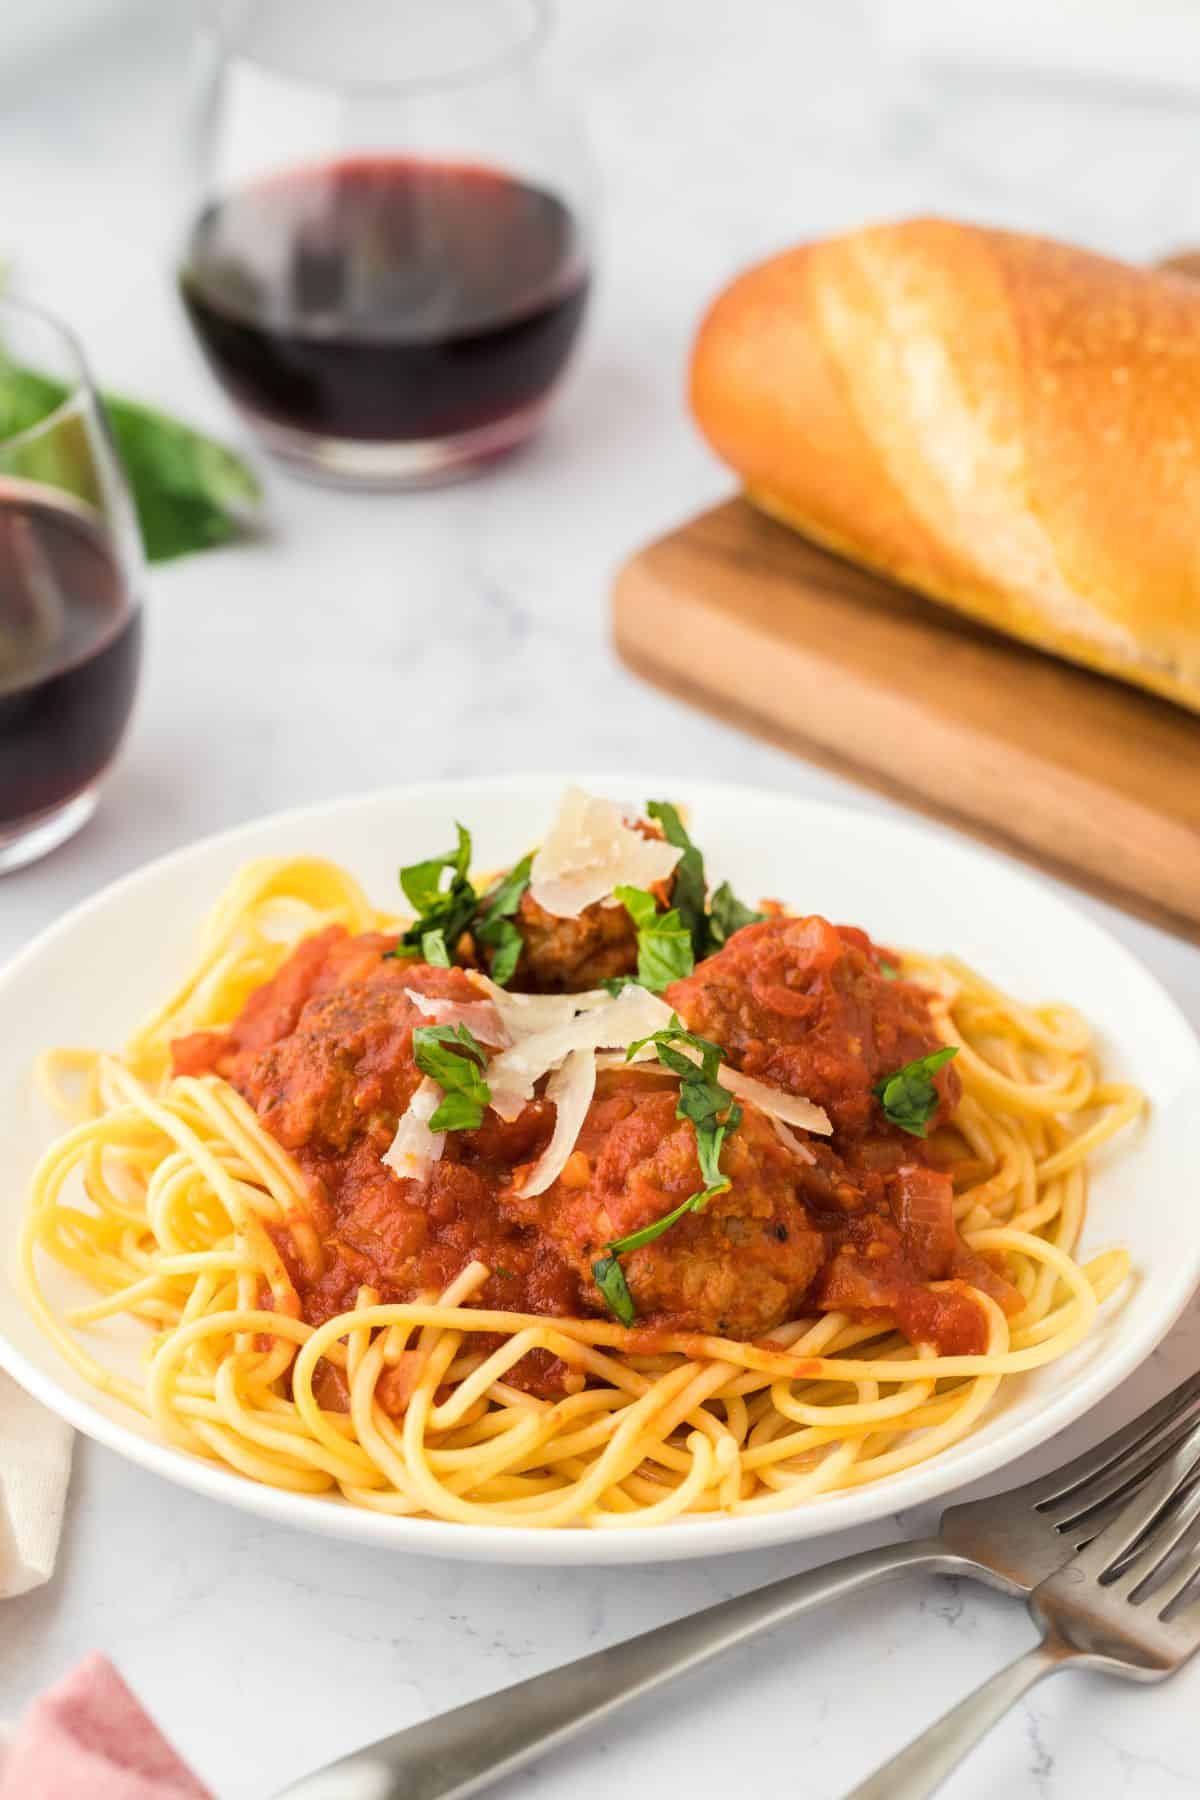 A plate of soul food spaghetti and meatballs on the table with a sprig of basil and loaf of bread in the background.